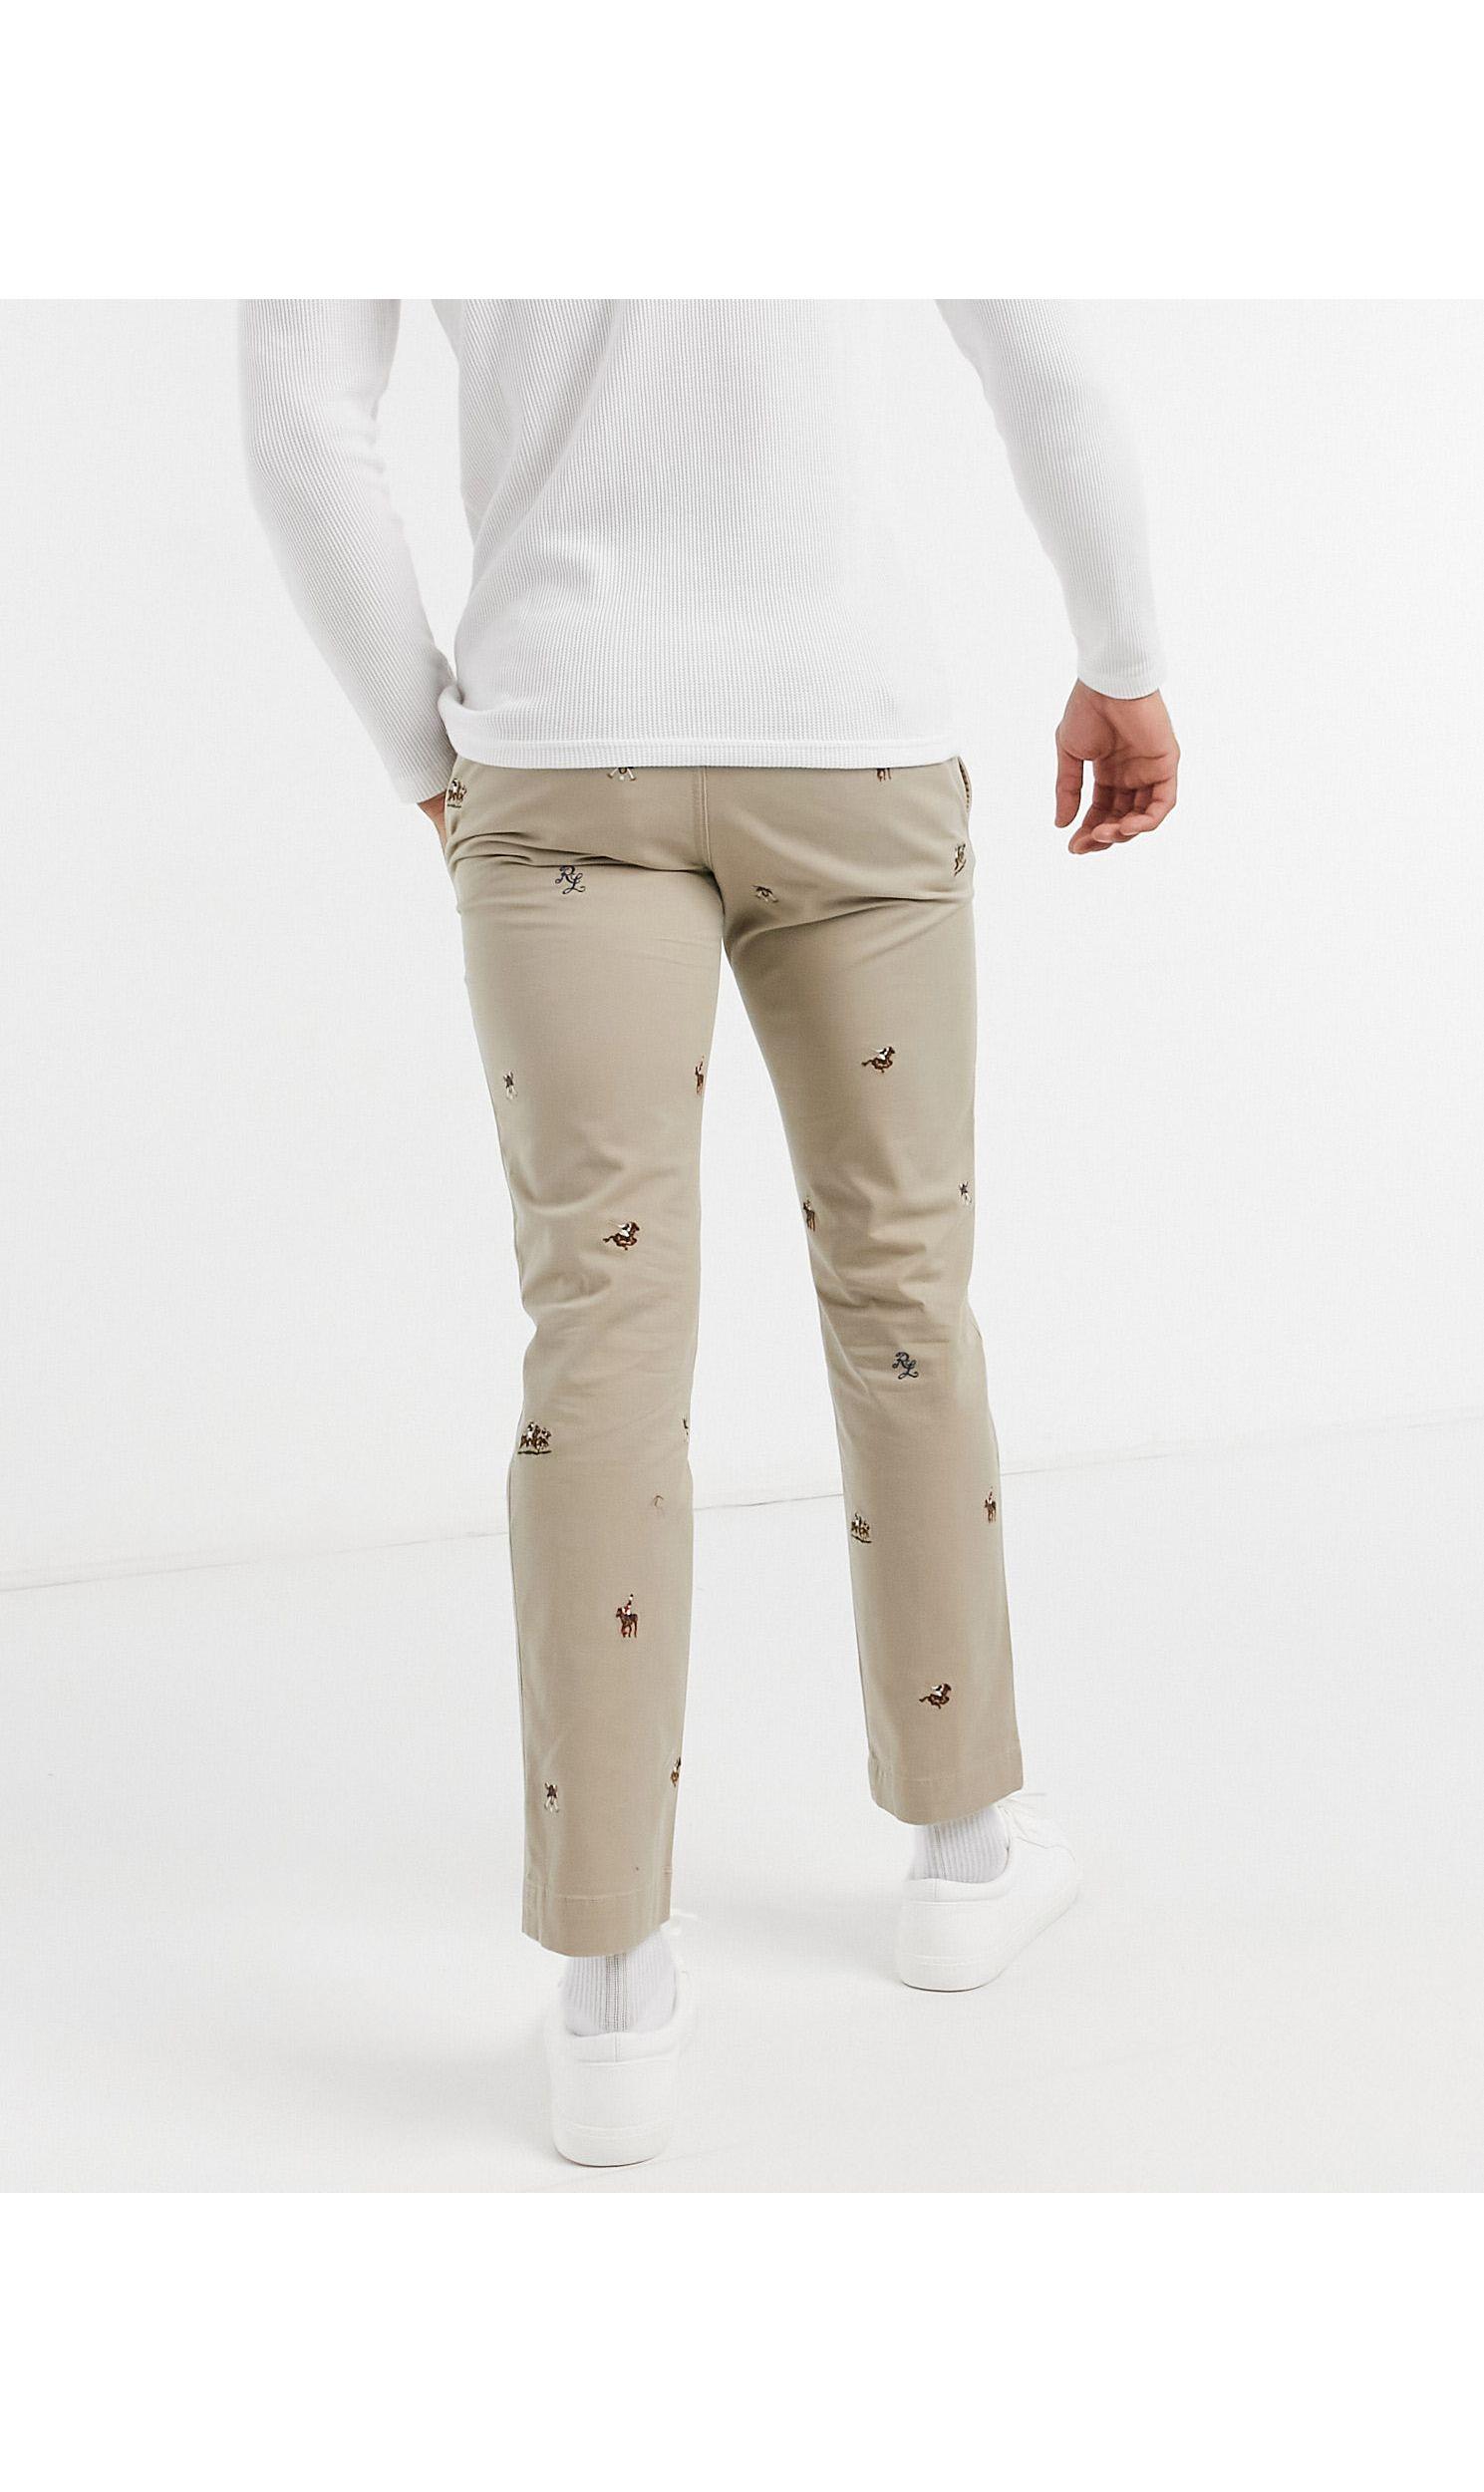 mens slim fit chinos/jeans by Stallion 